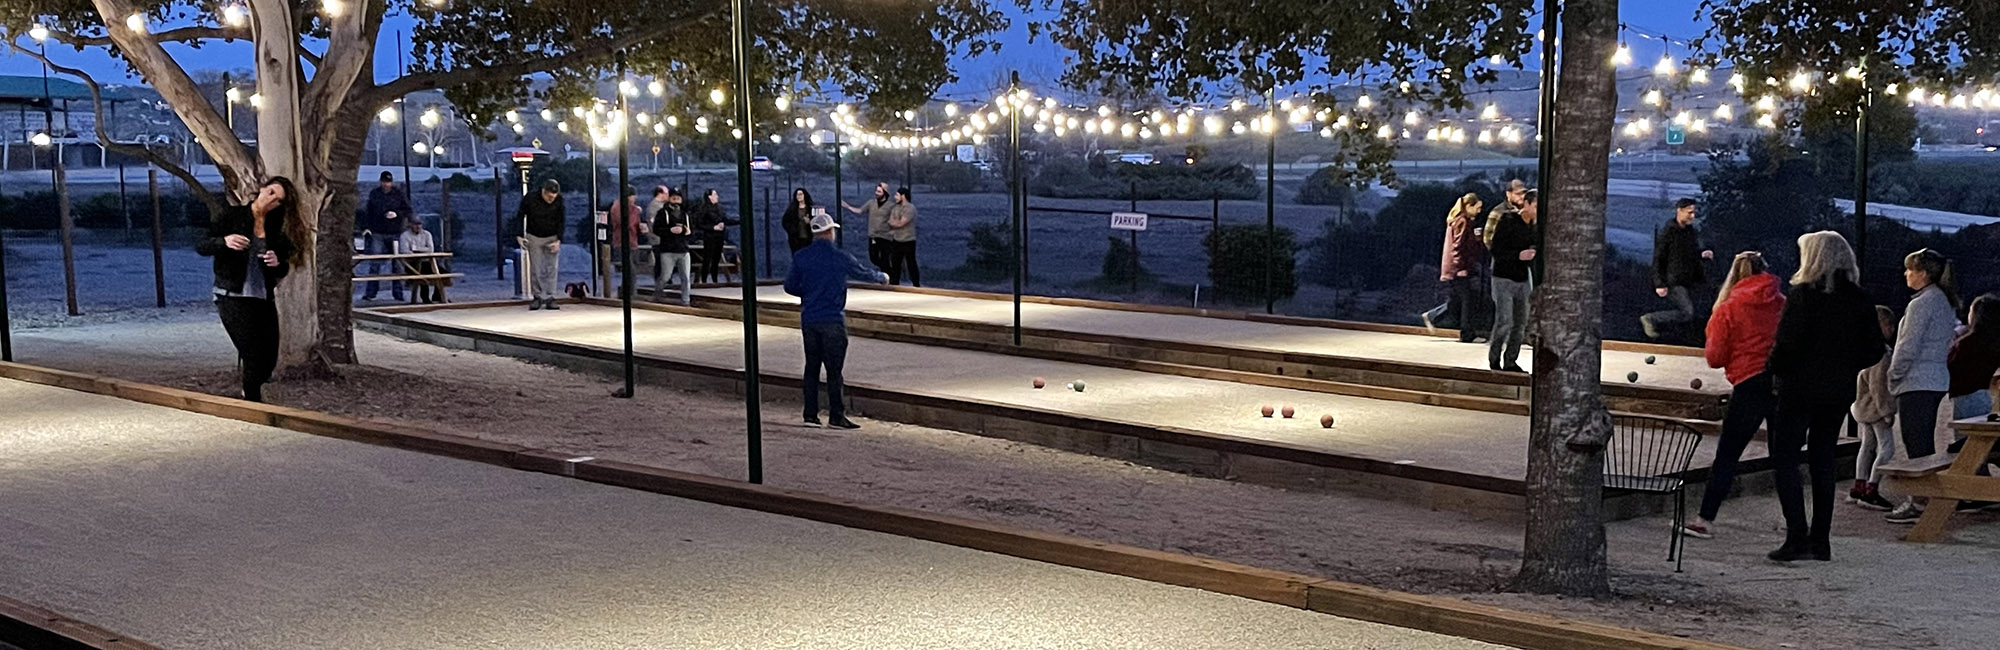 Rules / How to Play Bocce